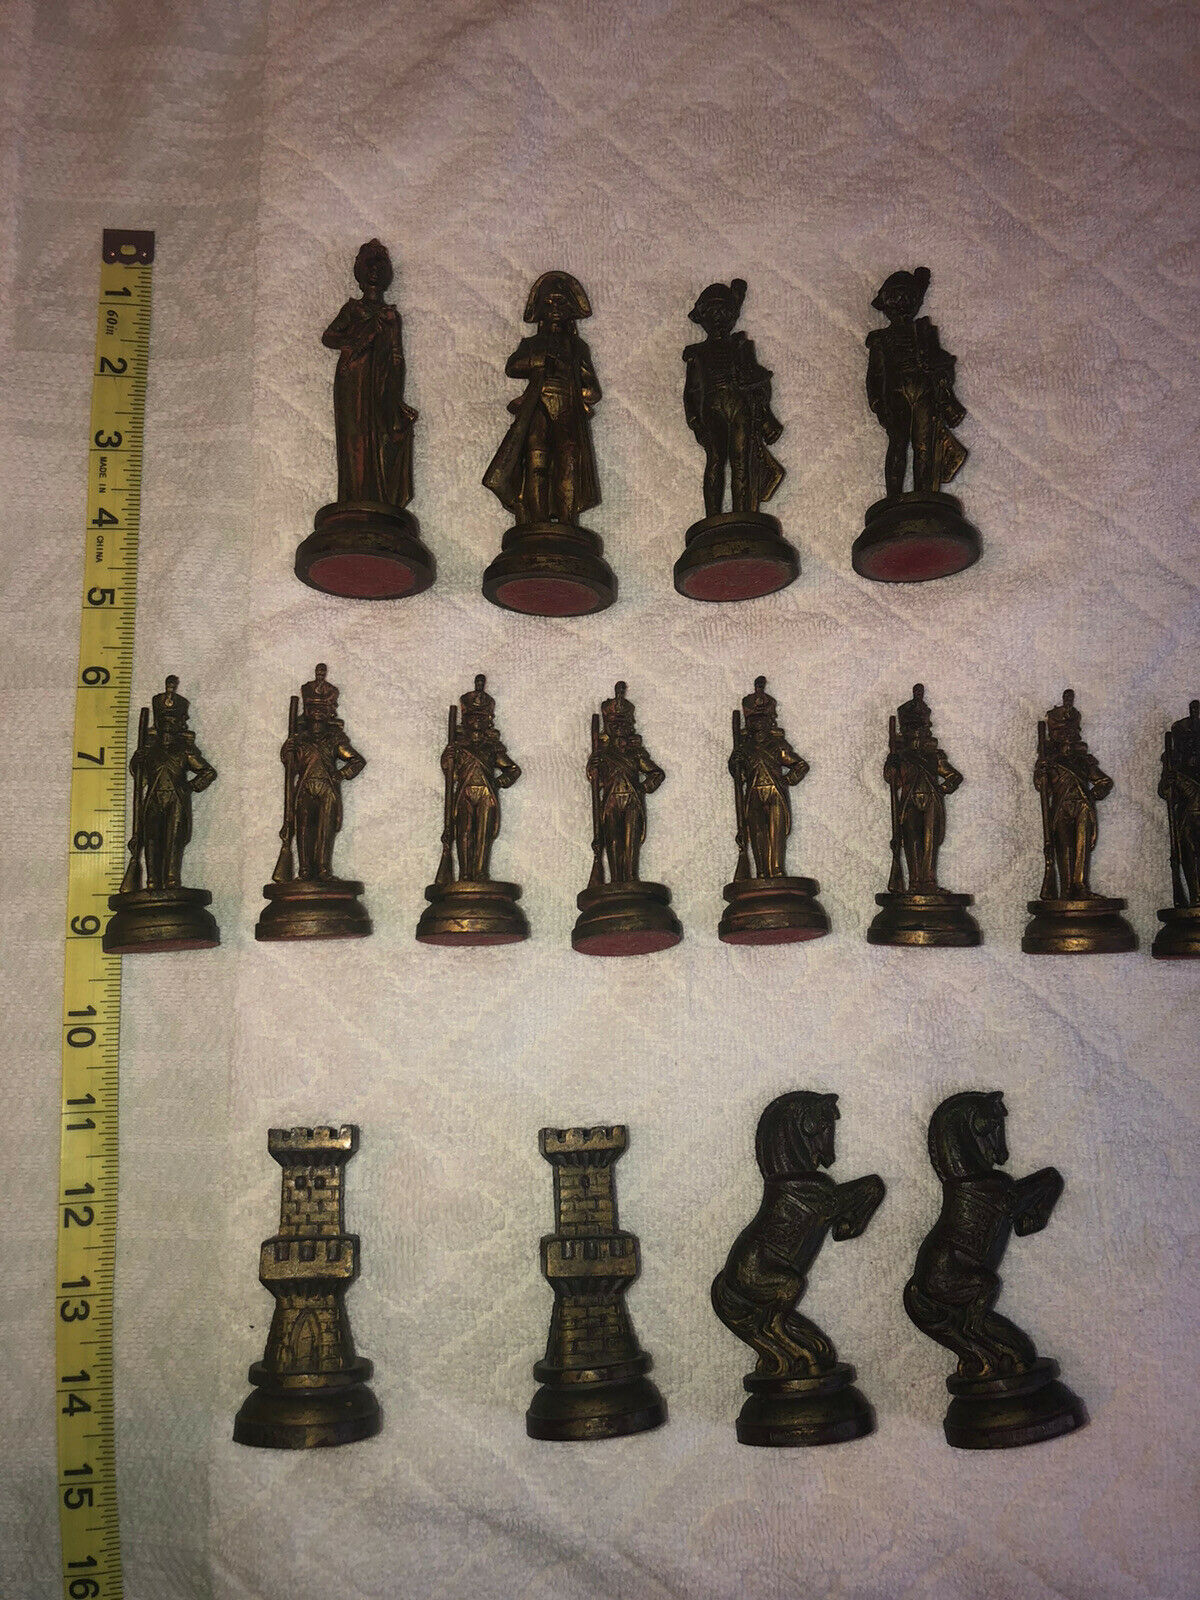 Vintage Napoleon Depose Italy Incomplete Chess Set Gold Silver Resin